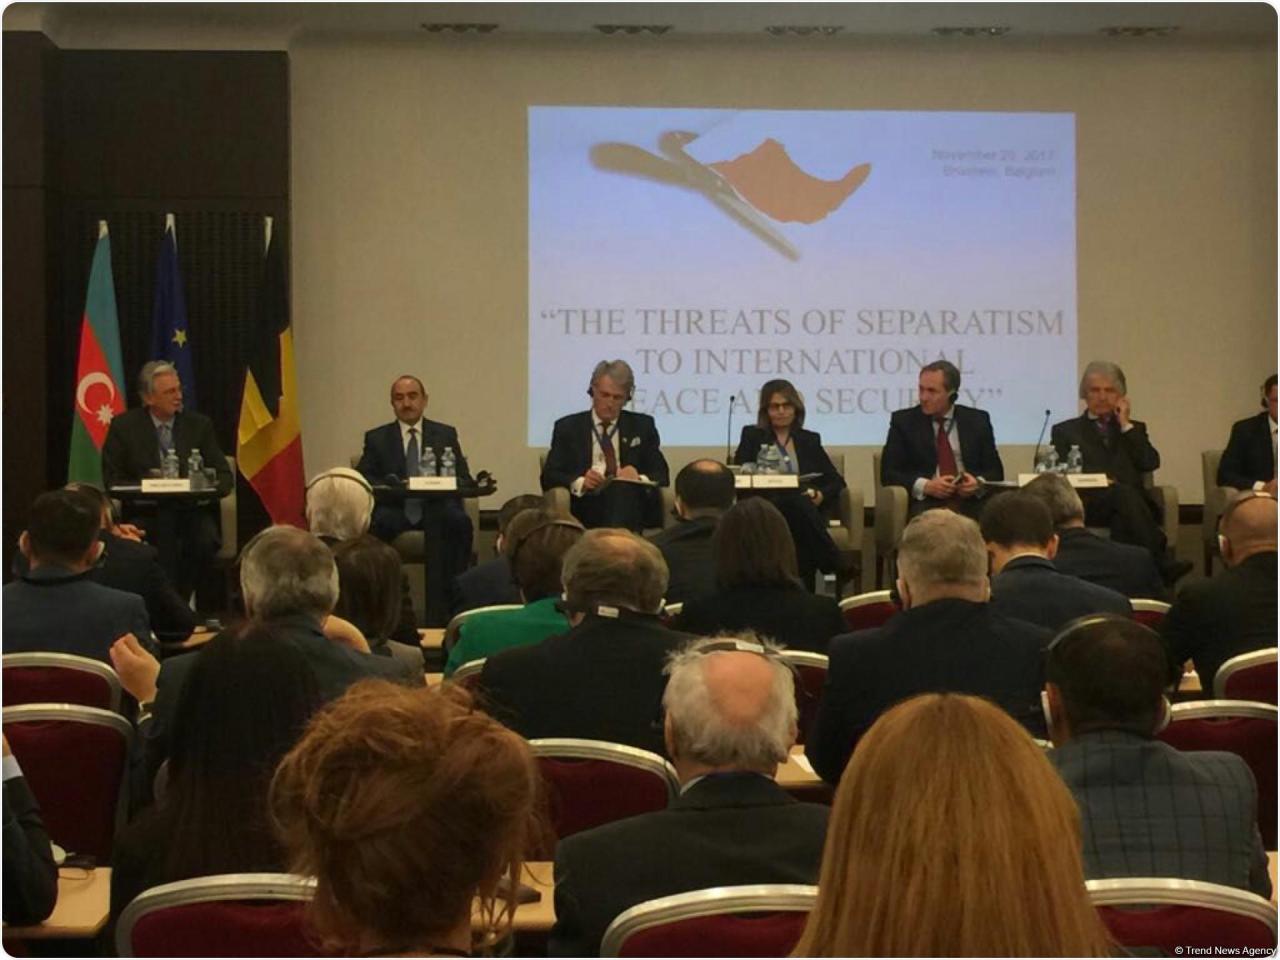 Azerbaijan's top official raises Nagorno-Karabakh issue at prestigious event in Brussels [UPDATE]